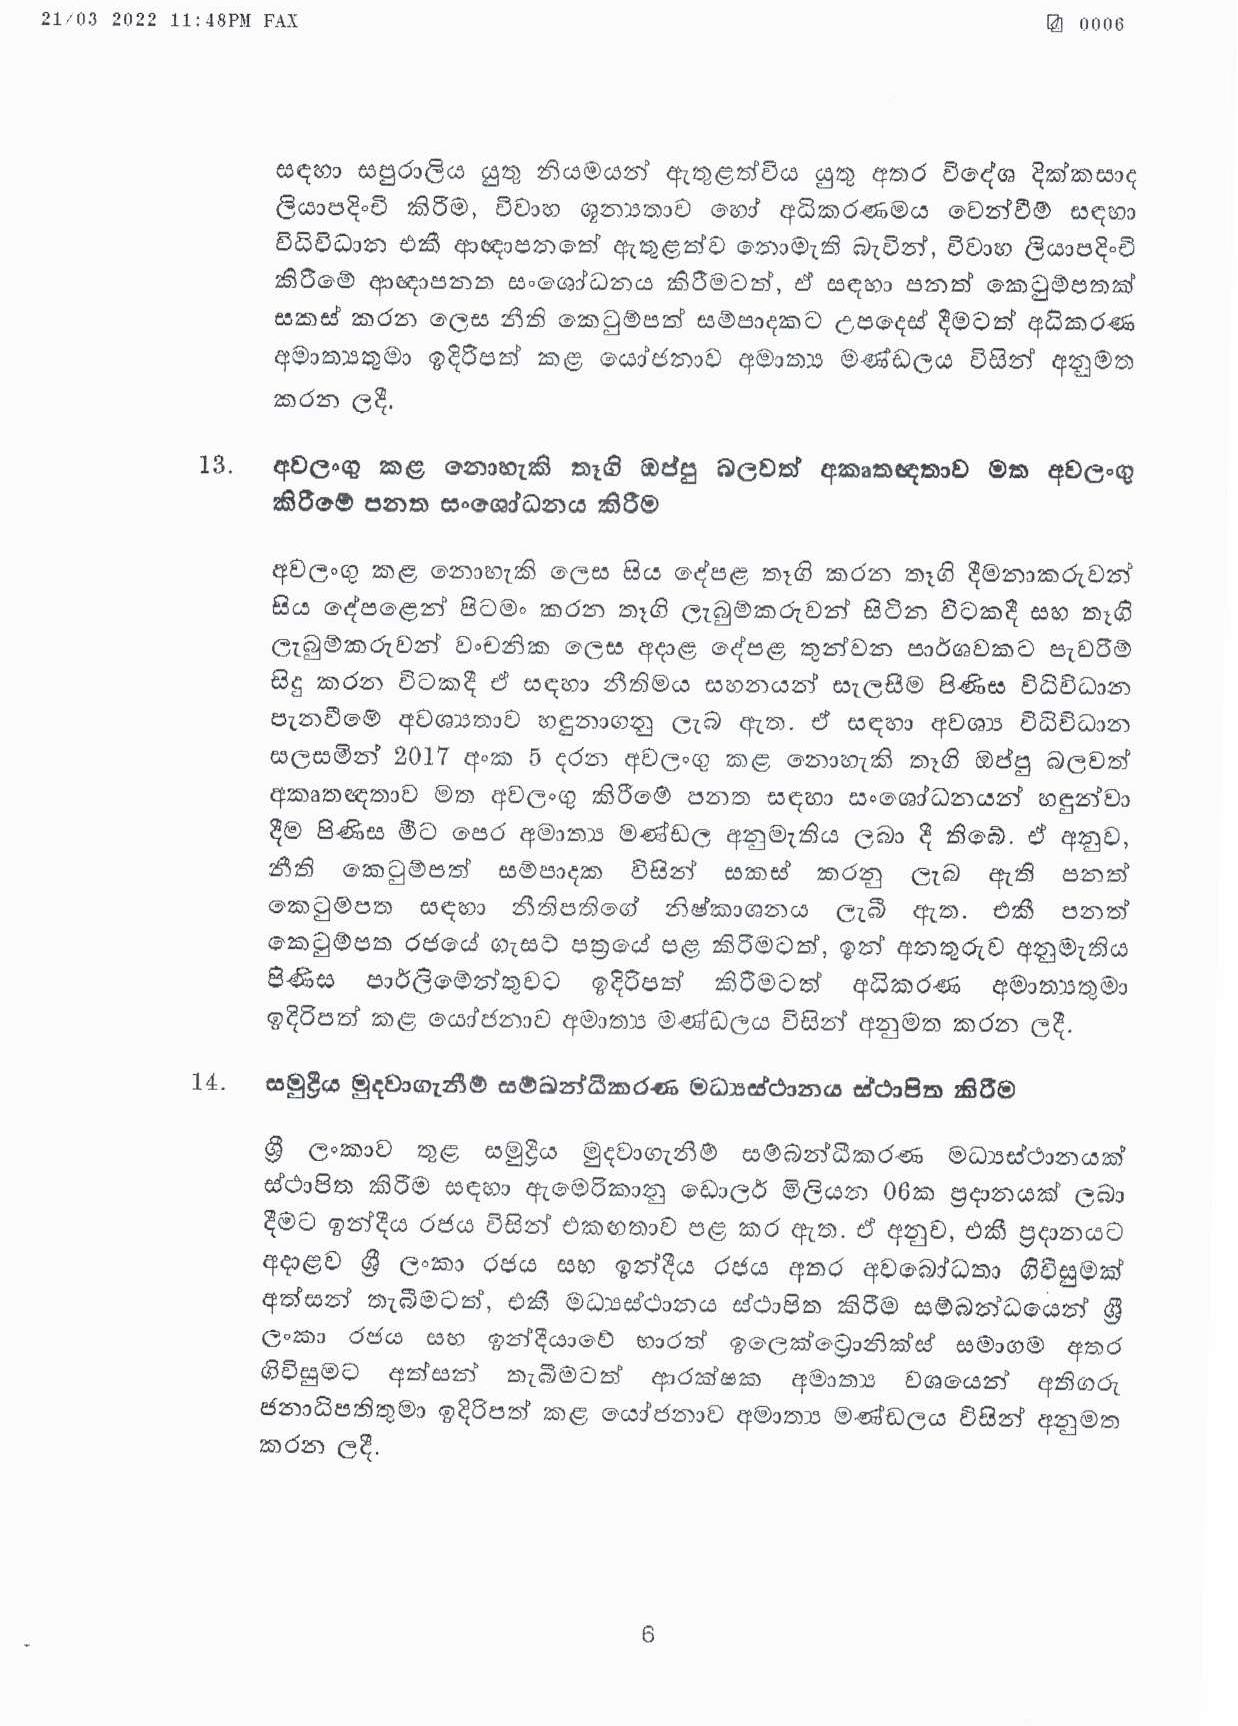 Cabinet Decisions on 21.03.2022 page 006